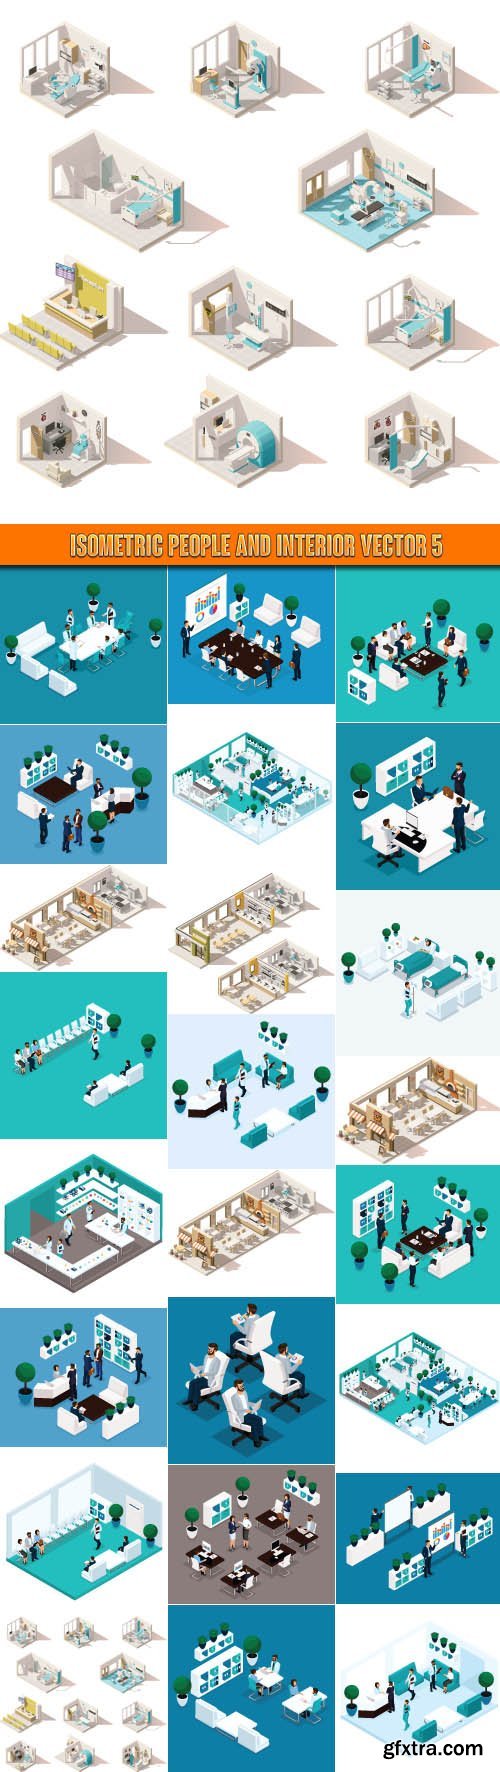 Isometric people and interior vector 5